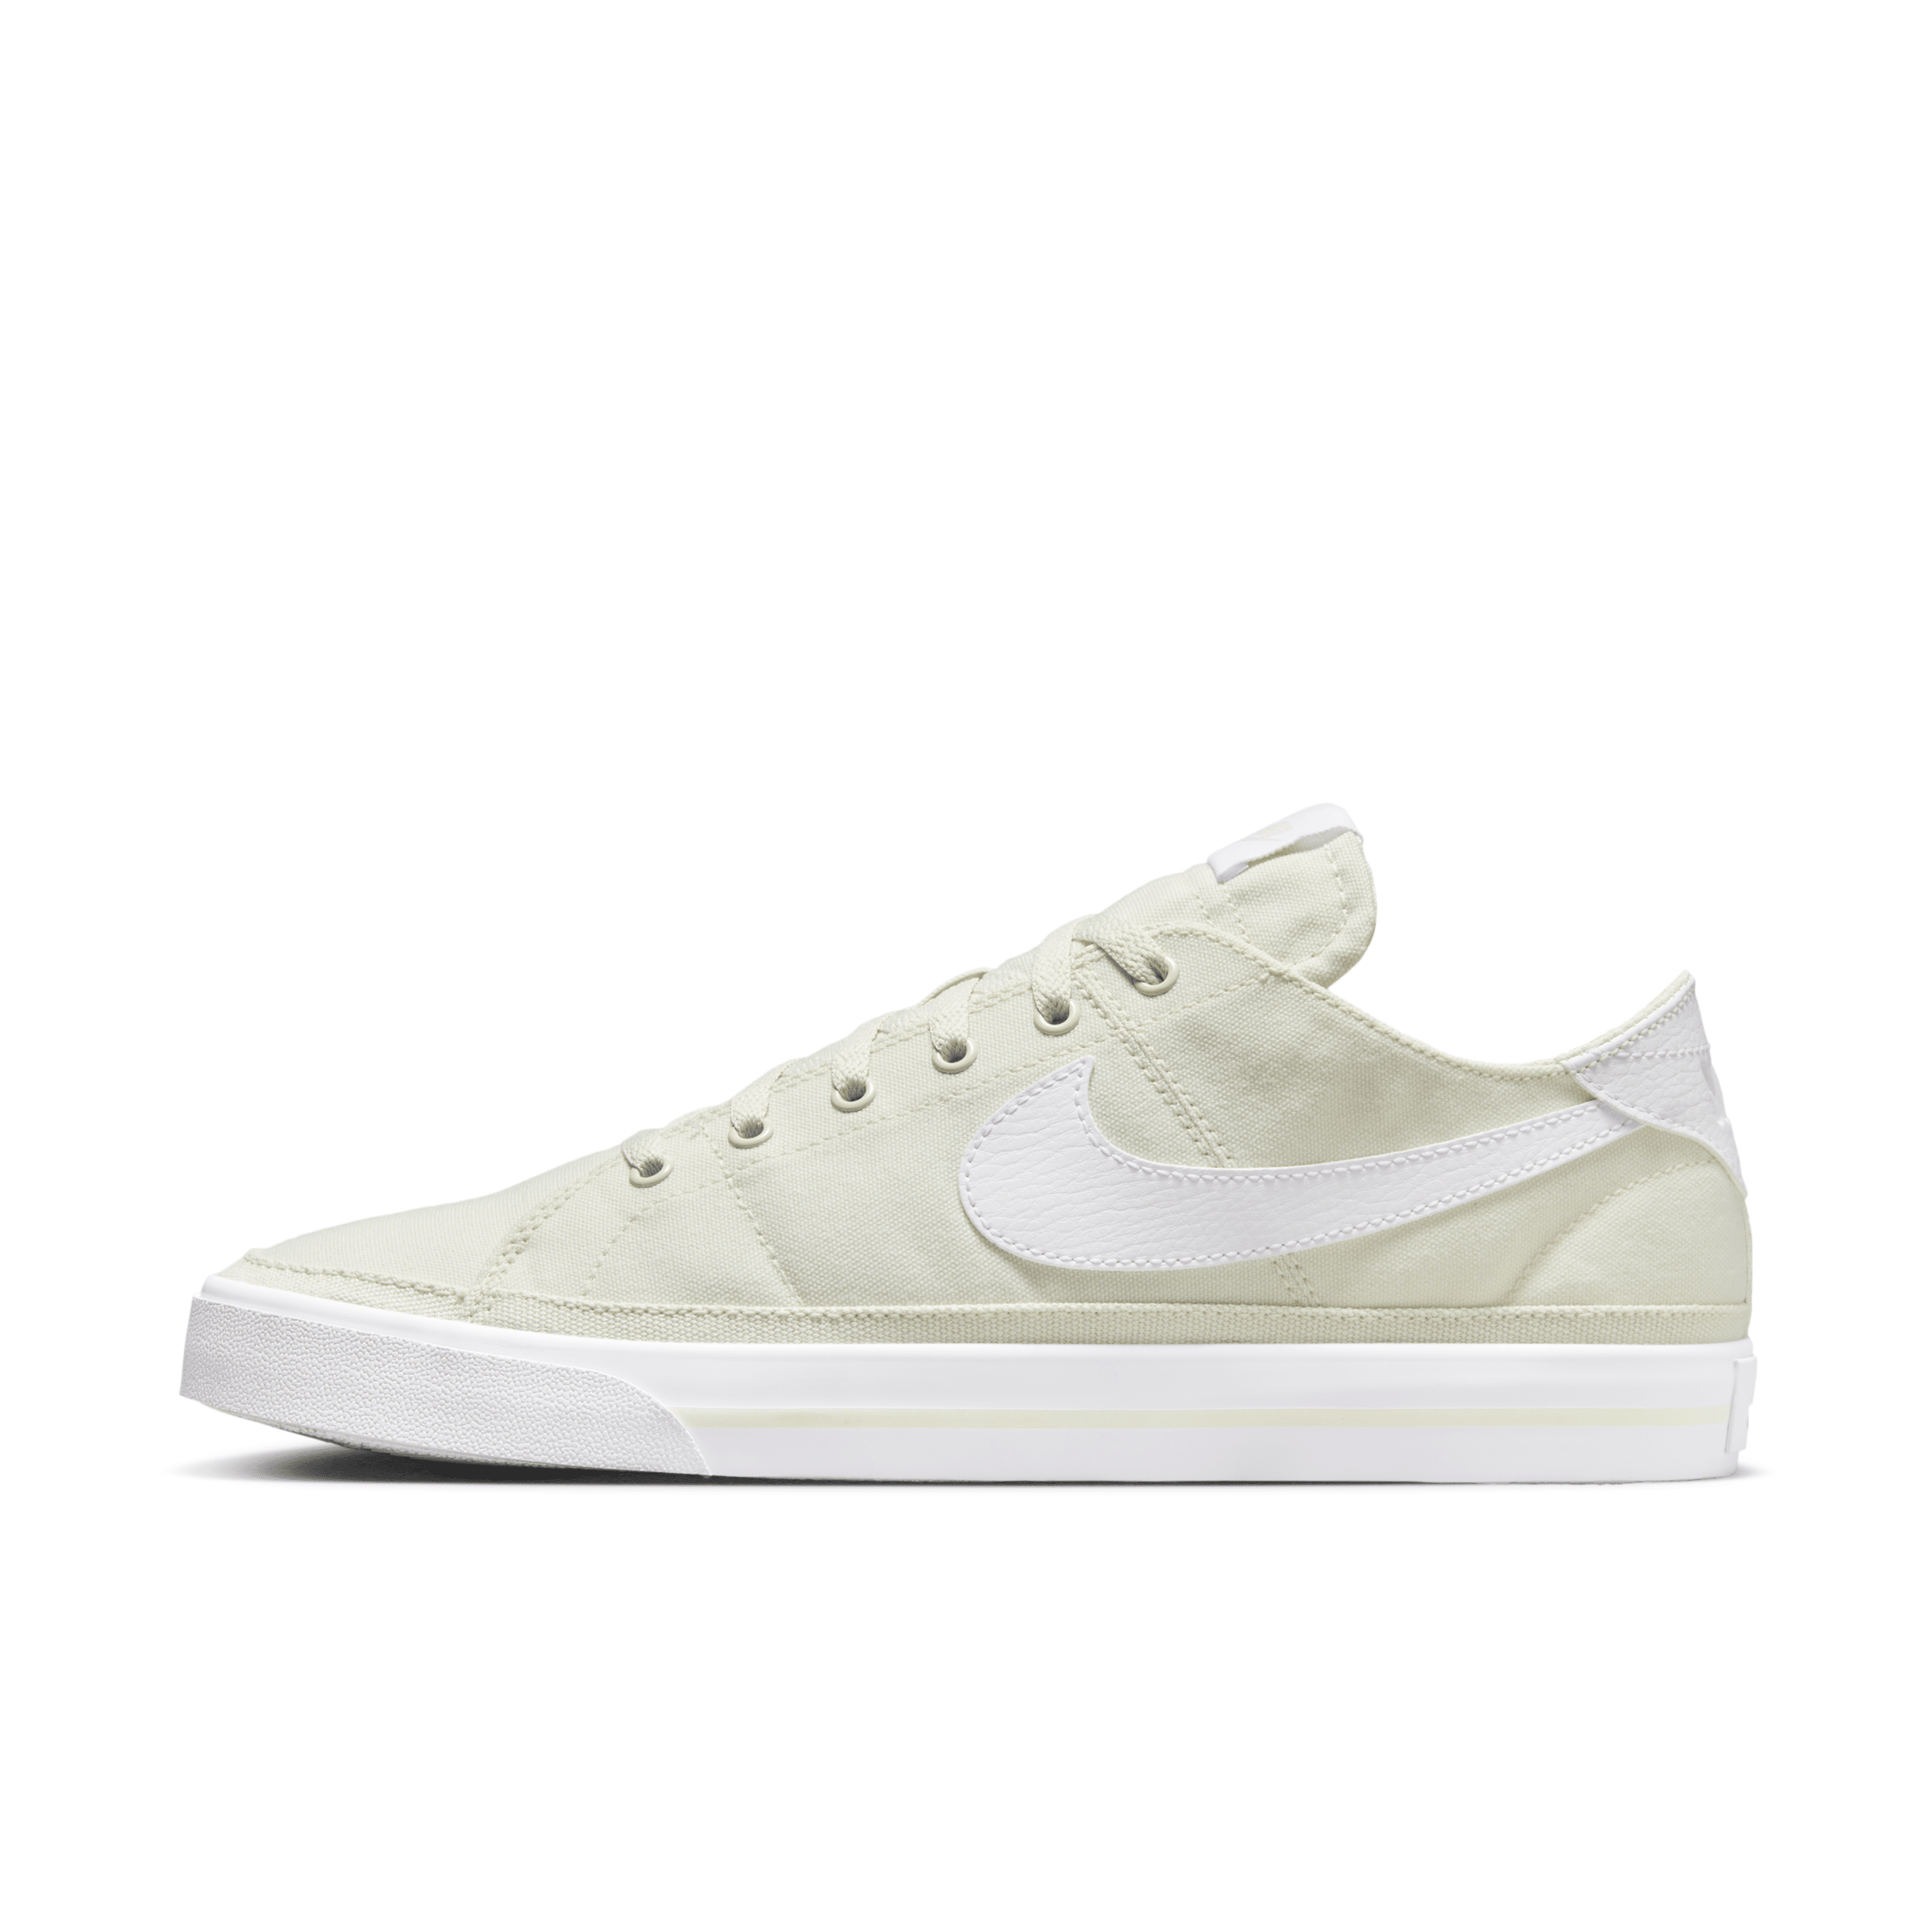 Nike Men's Court Legacy Canvas Shoes In Green